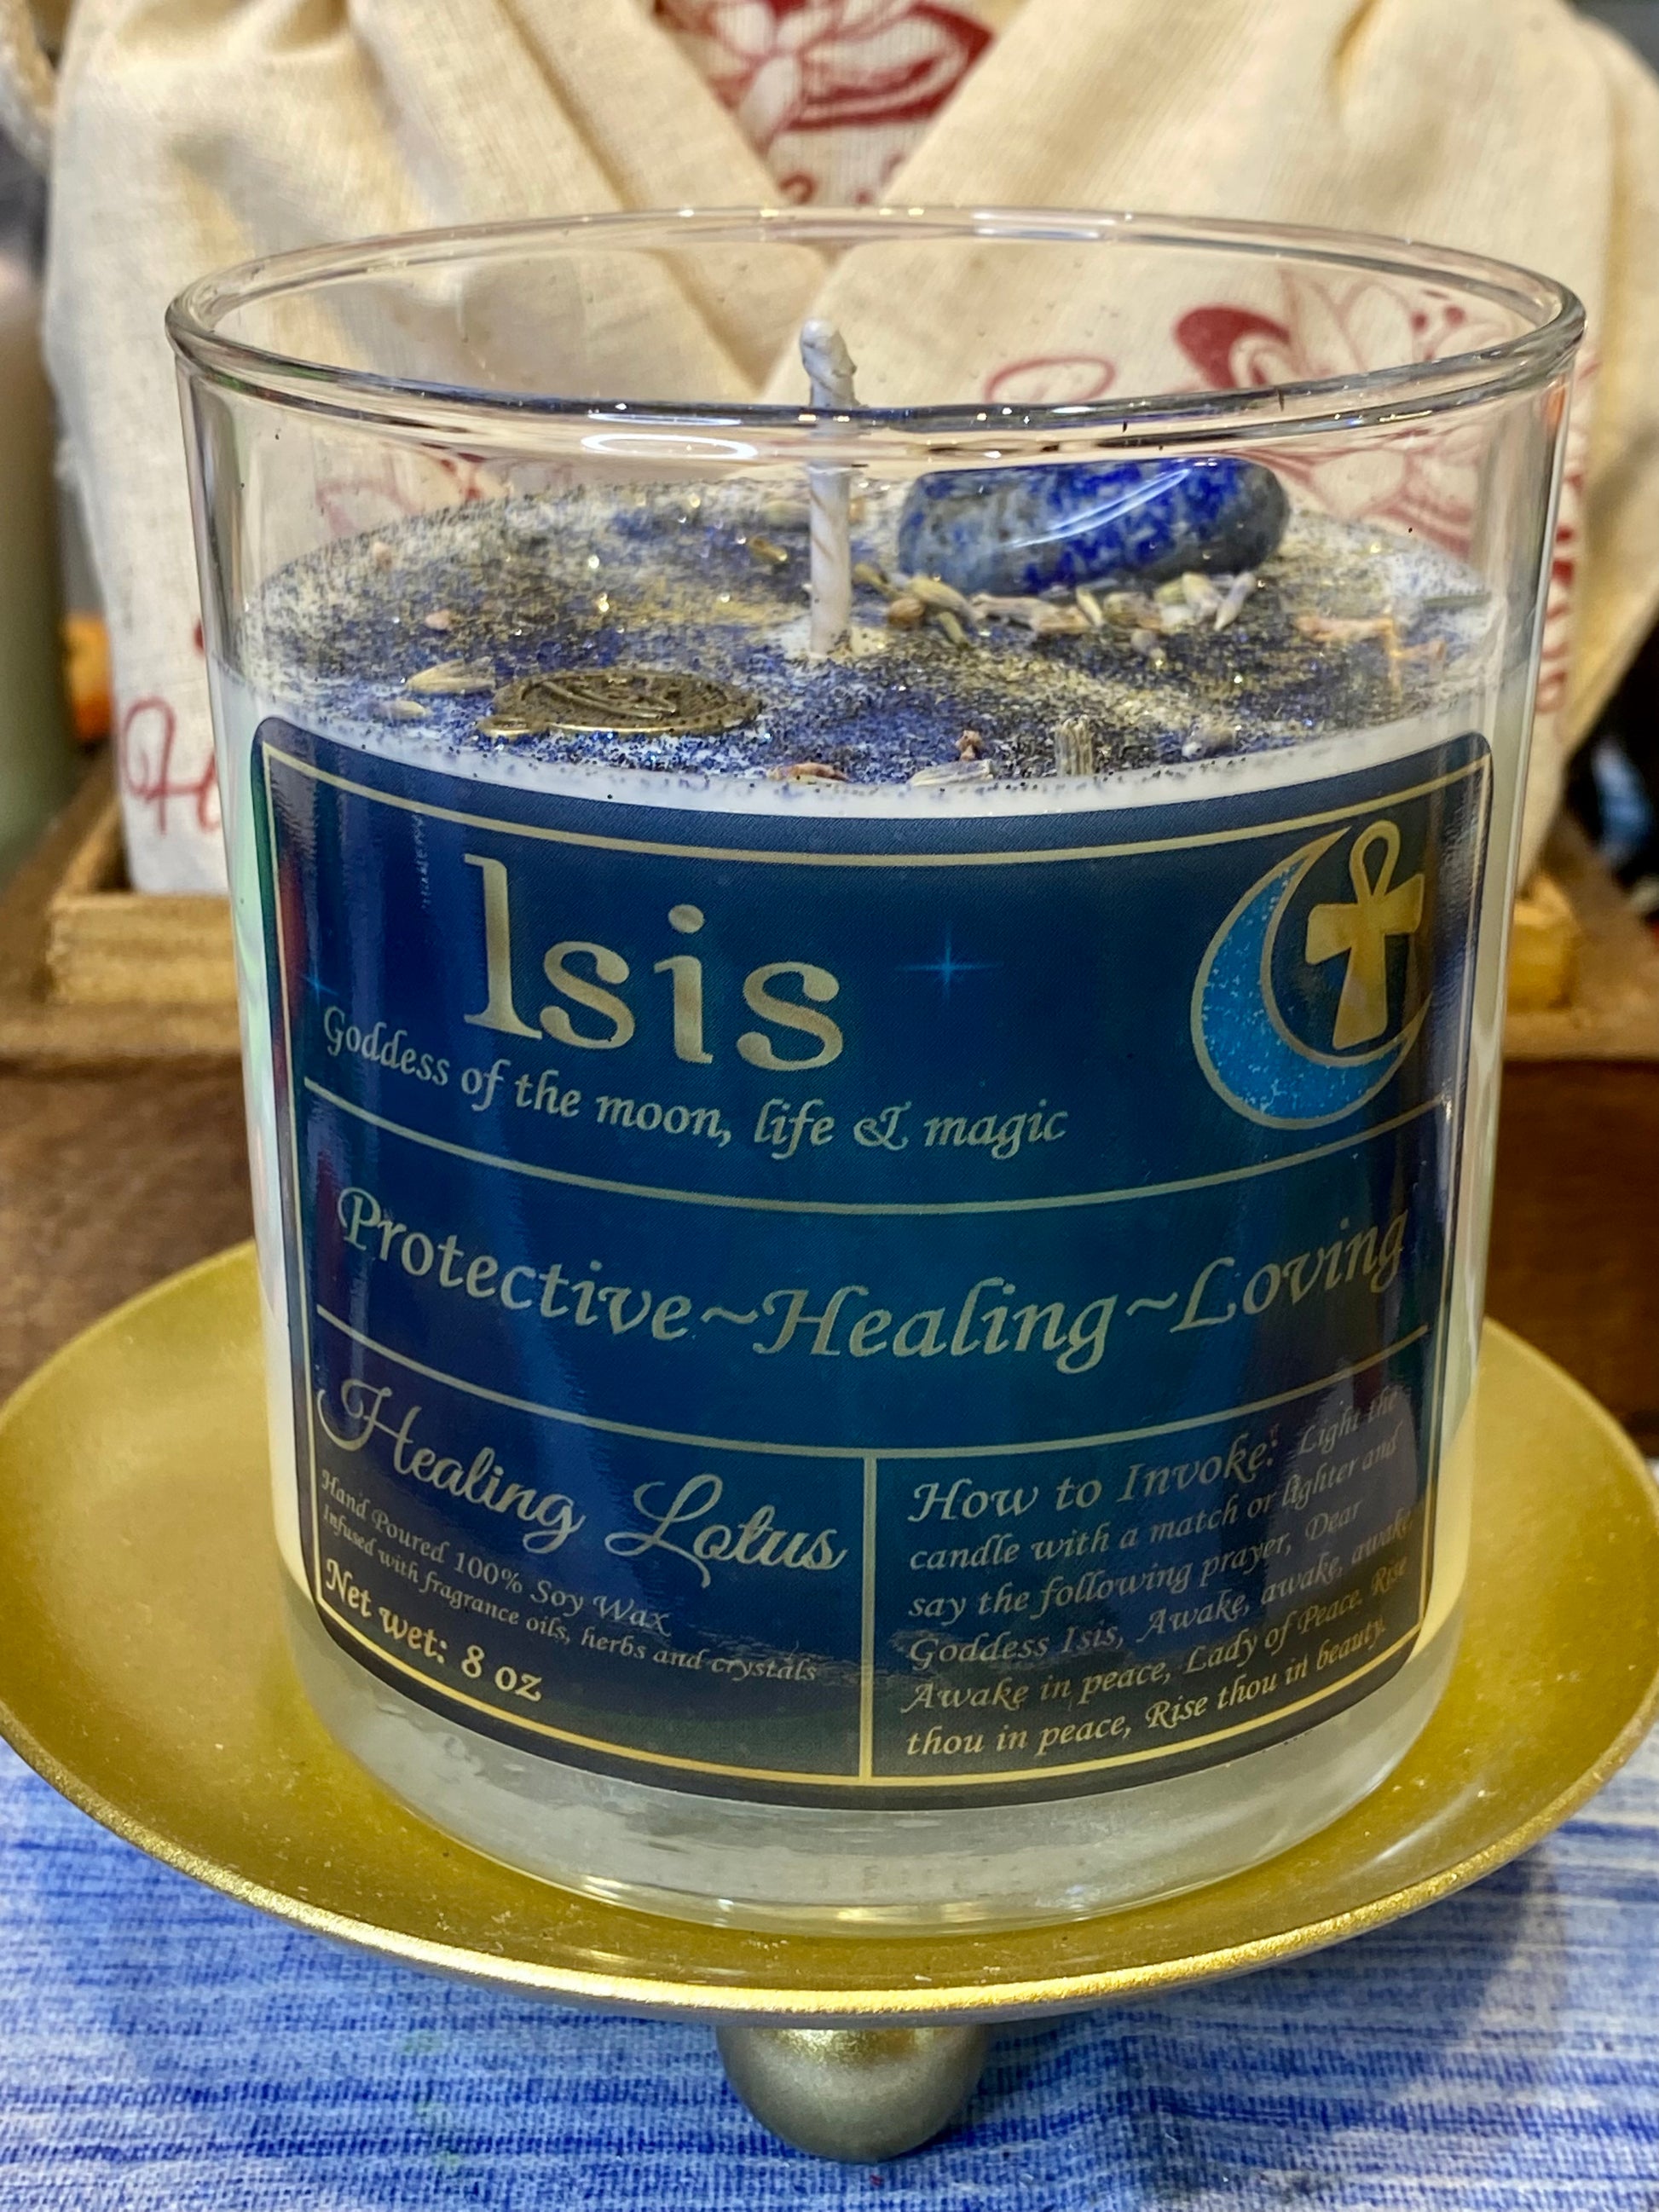 ISIS Water: the liquid of life